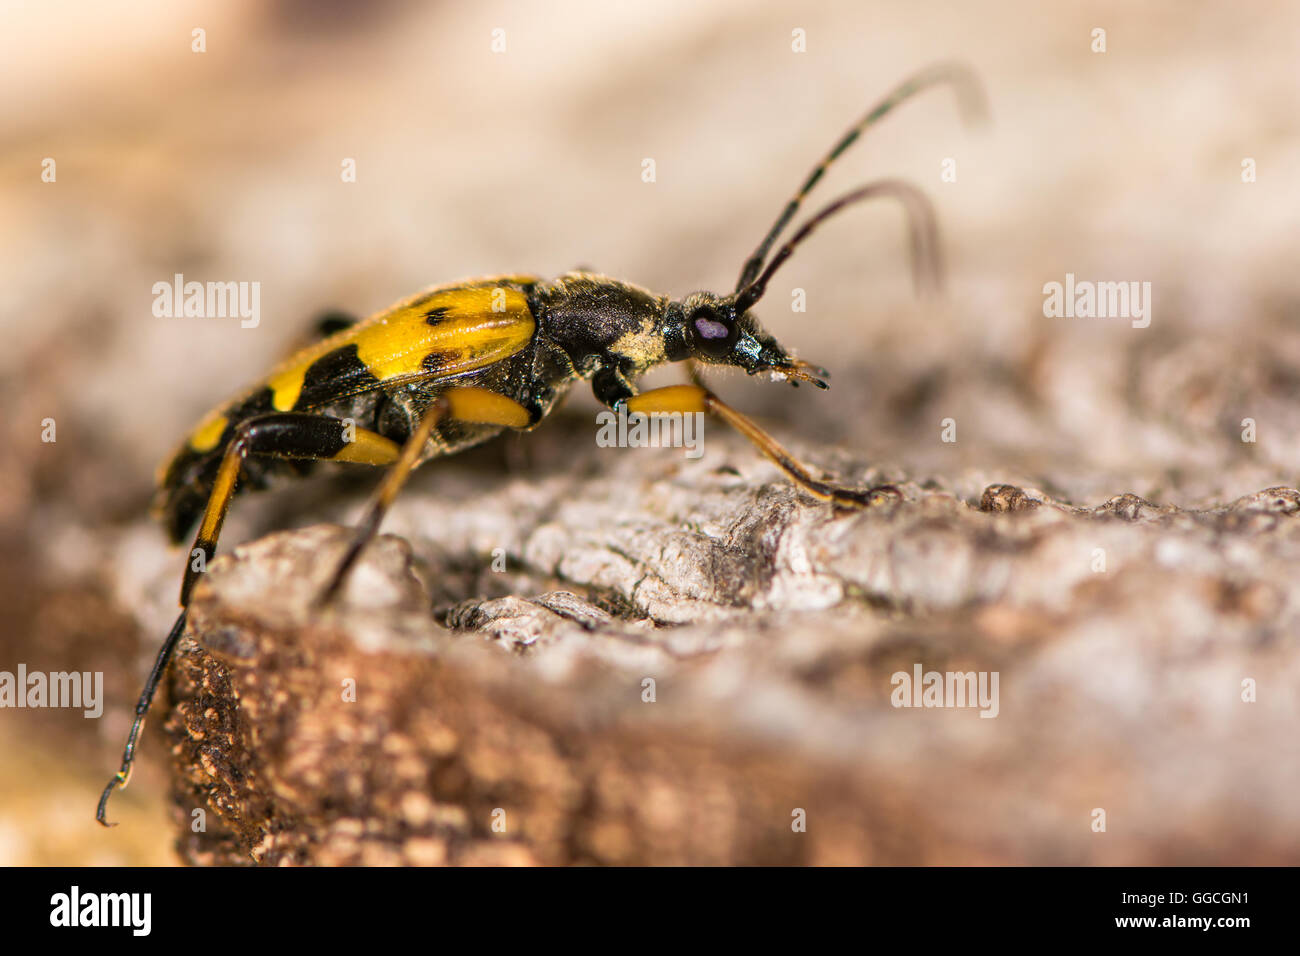 Spotted longhorn beetle (Rutpela maculata). Yellow and black insect in the family Cerambycidae, with very long antennae. Stock Photo